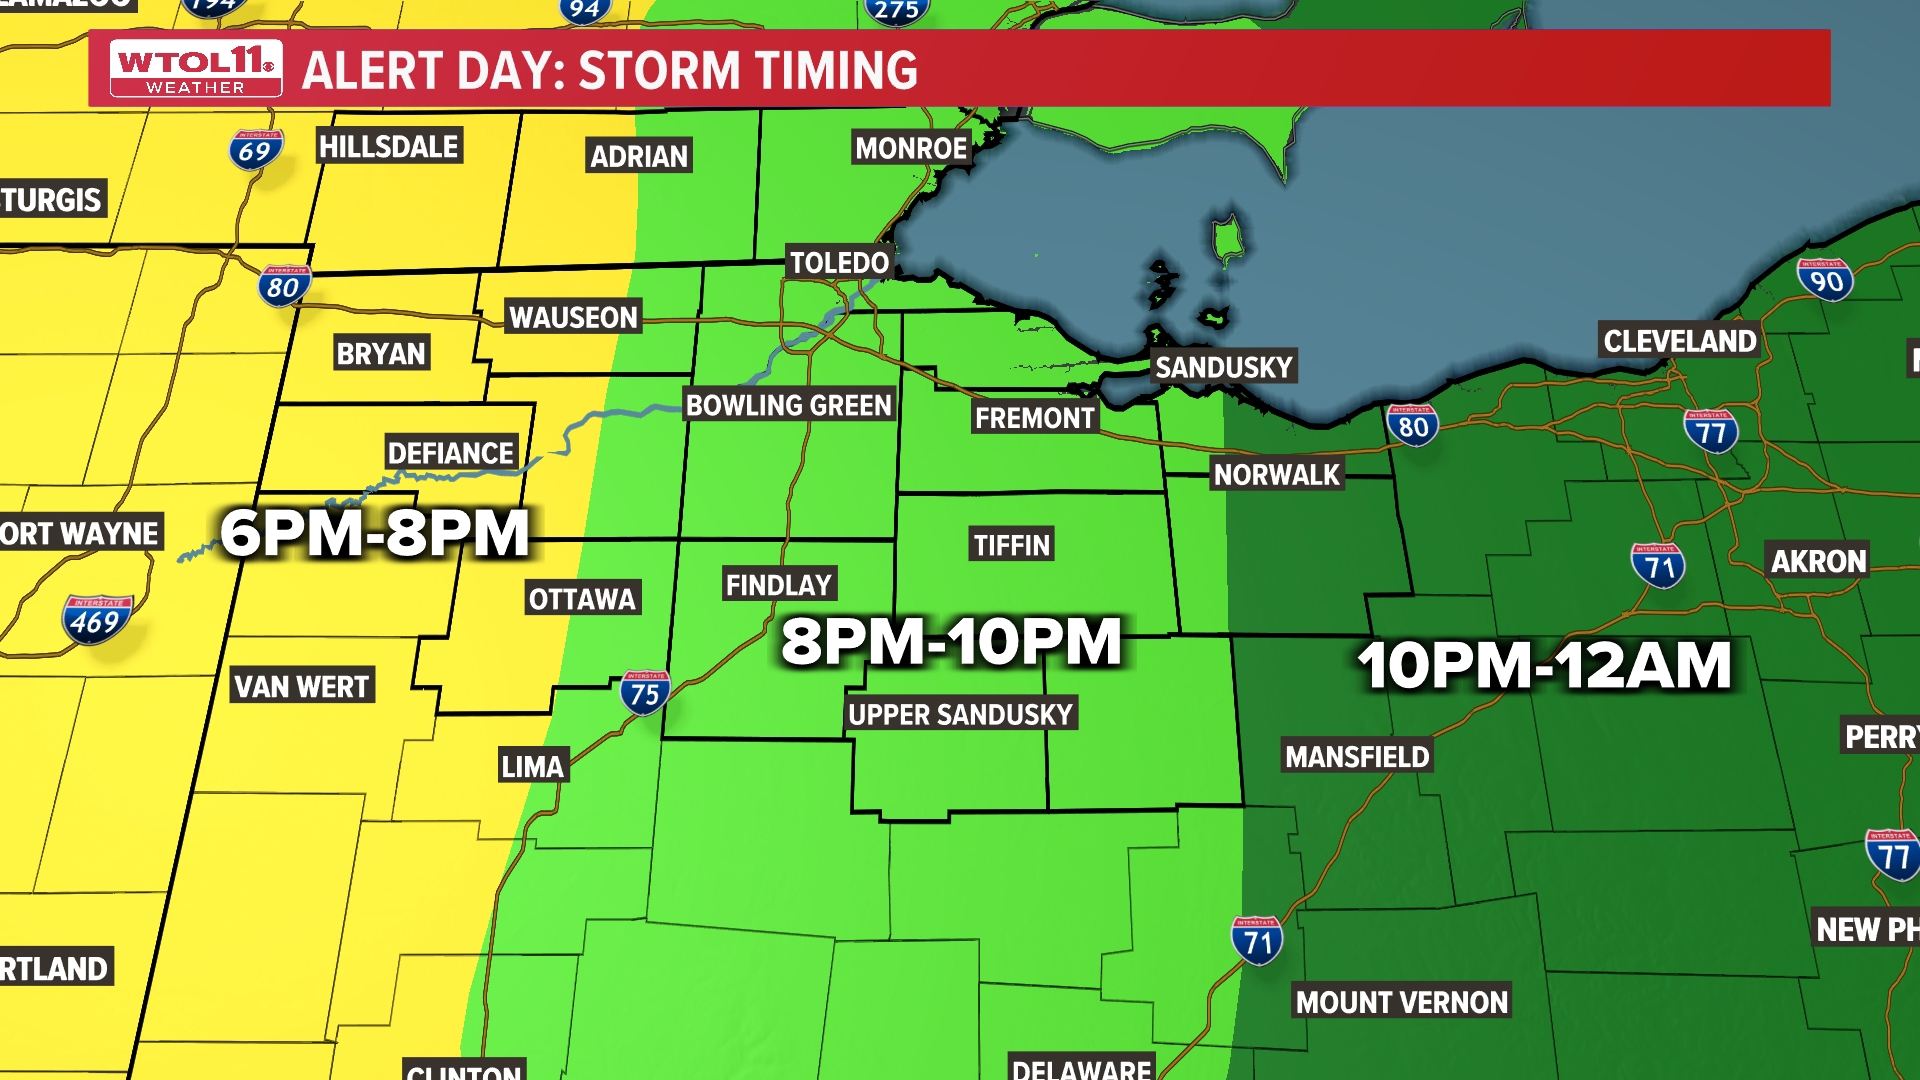 The WTOL 11 Weather Team is tracking severe weather in our area.